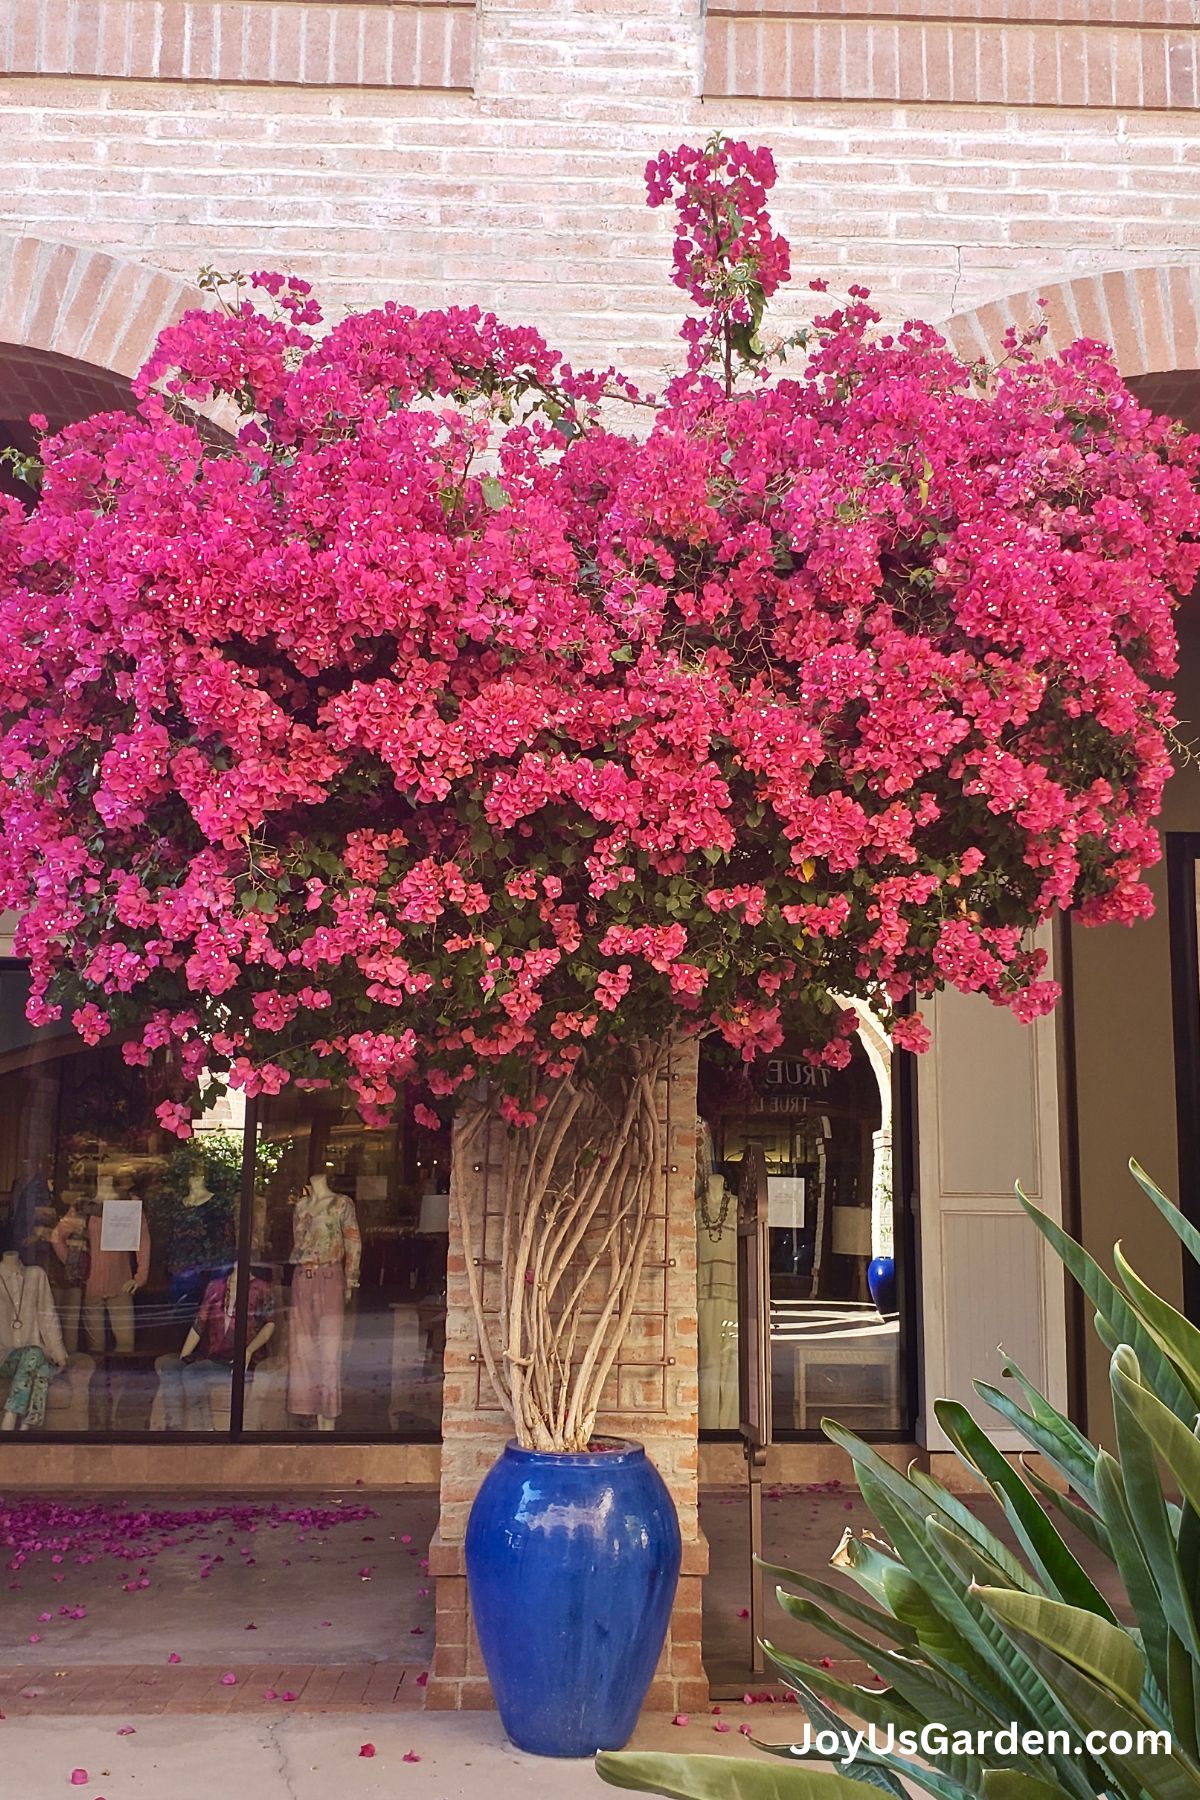 Large deep pink bougainvillea growing in a tall blue urn pot at outdoor mall.